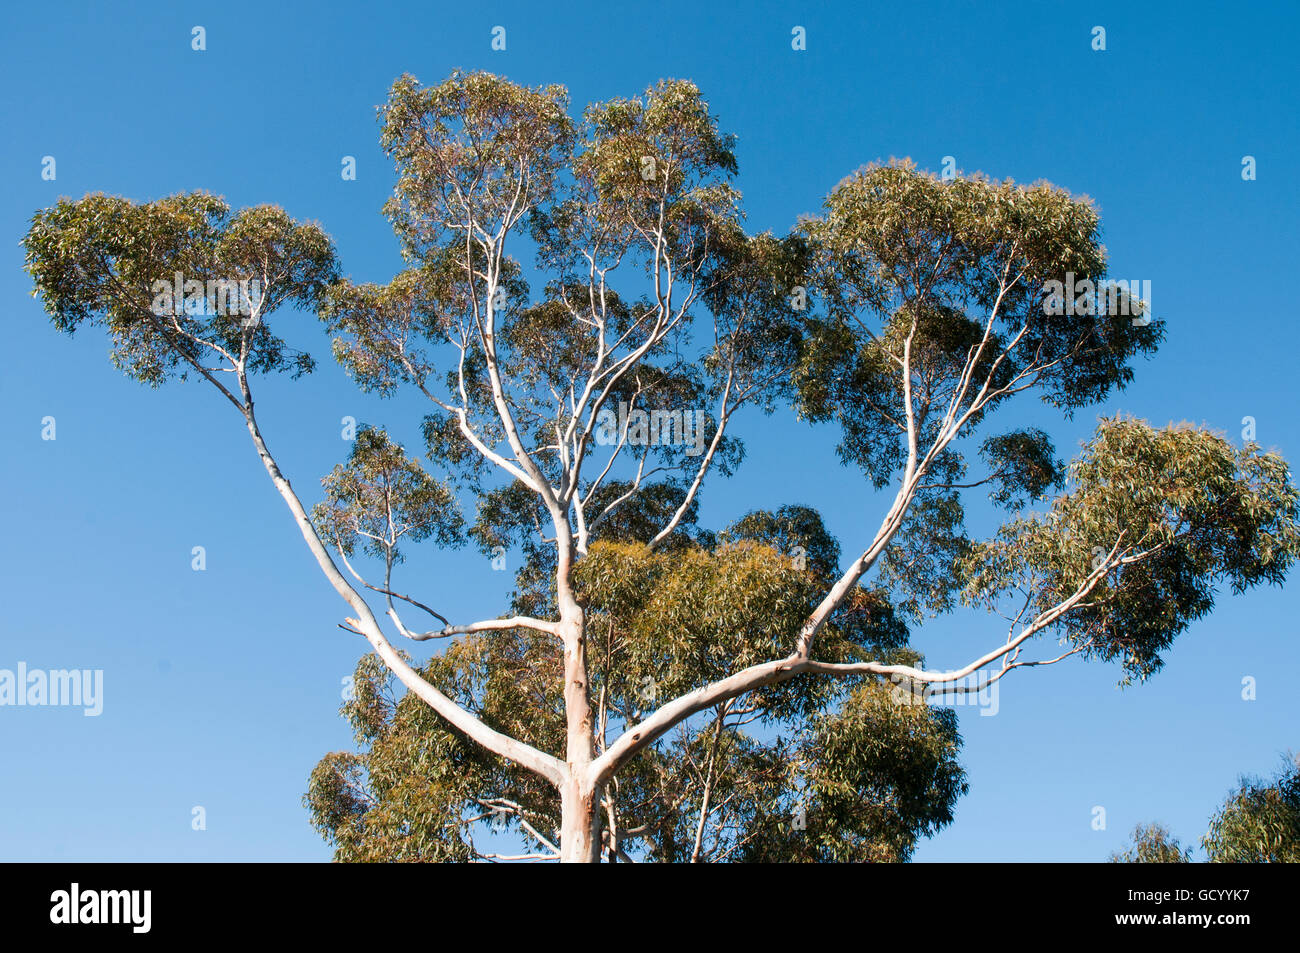 Spreading native eucalypt in a patch of open woodland in the bayside suburbs of Melbourne Stock Photo